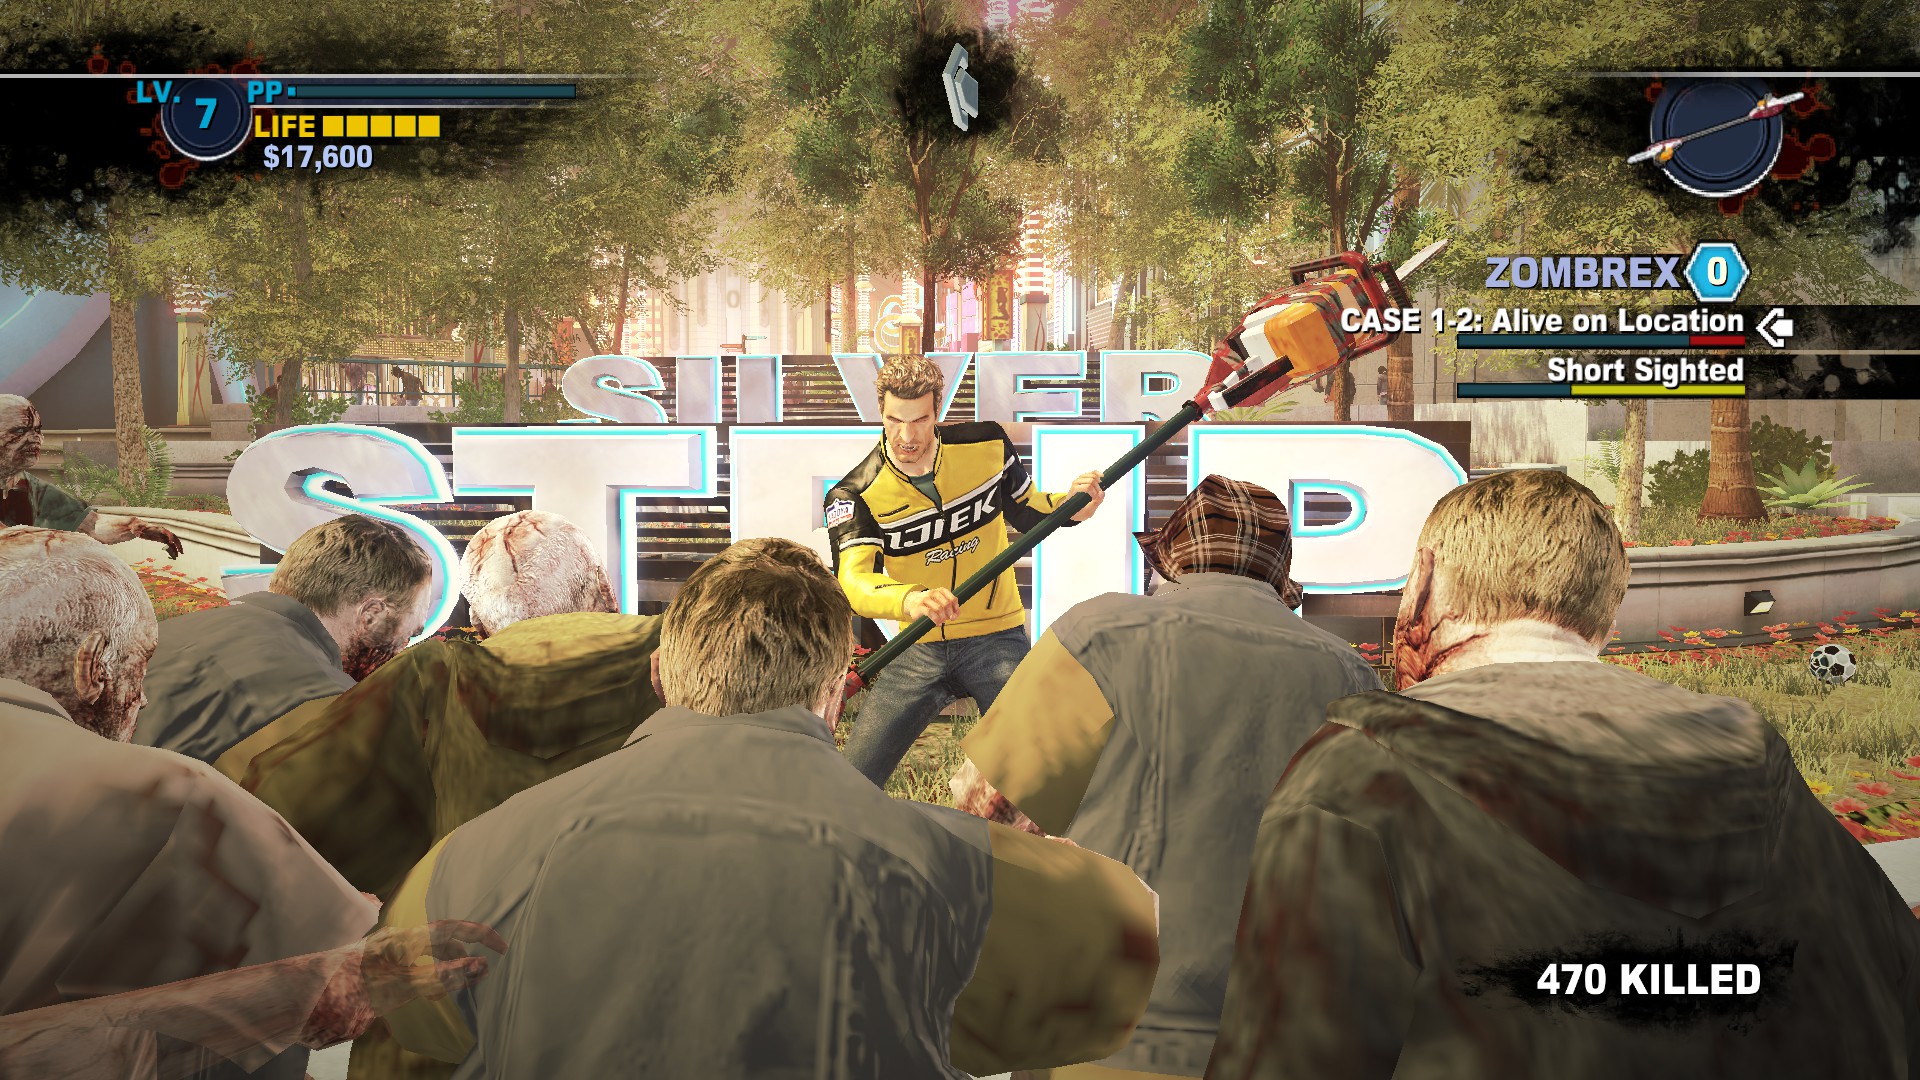 1080p/60FPS Dead Rising 1 and 2 Remasters' Pricing, Release Dates